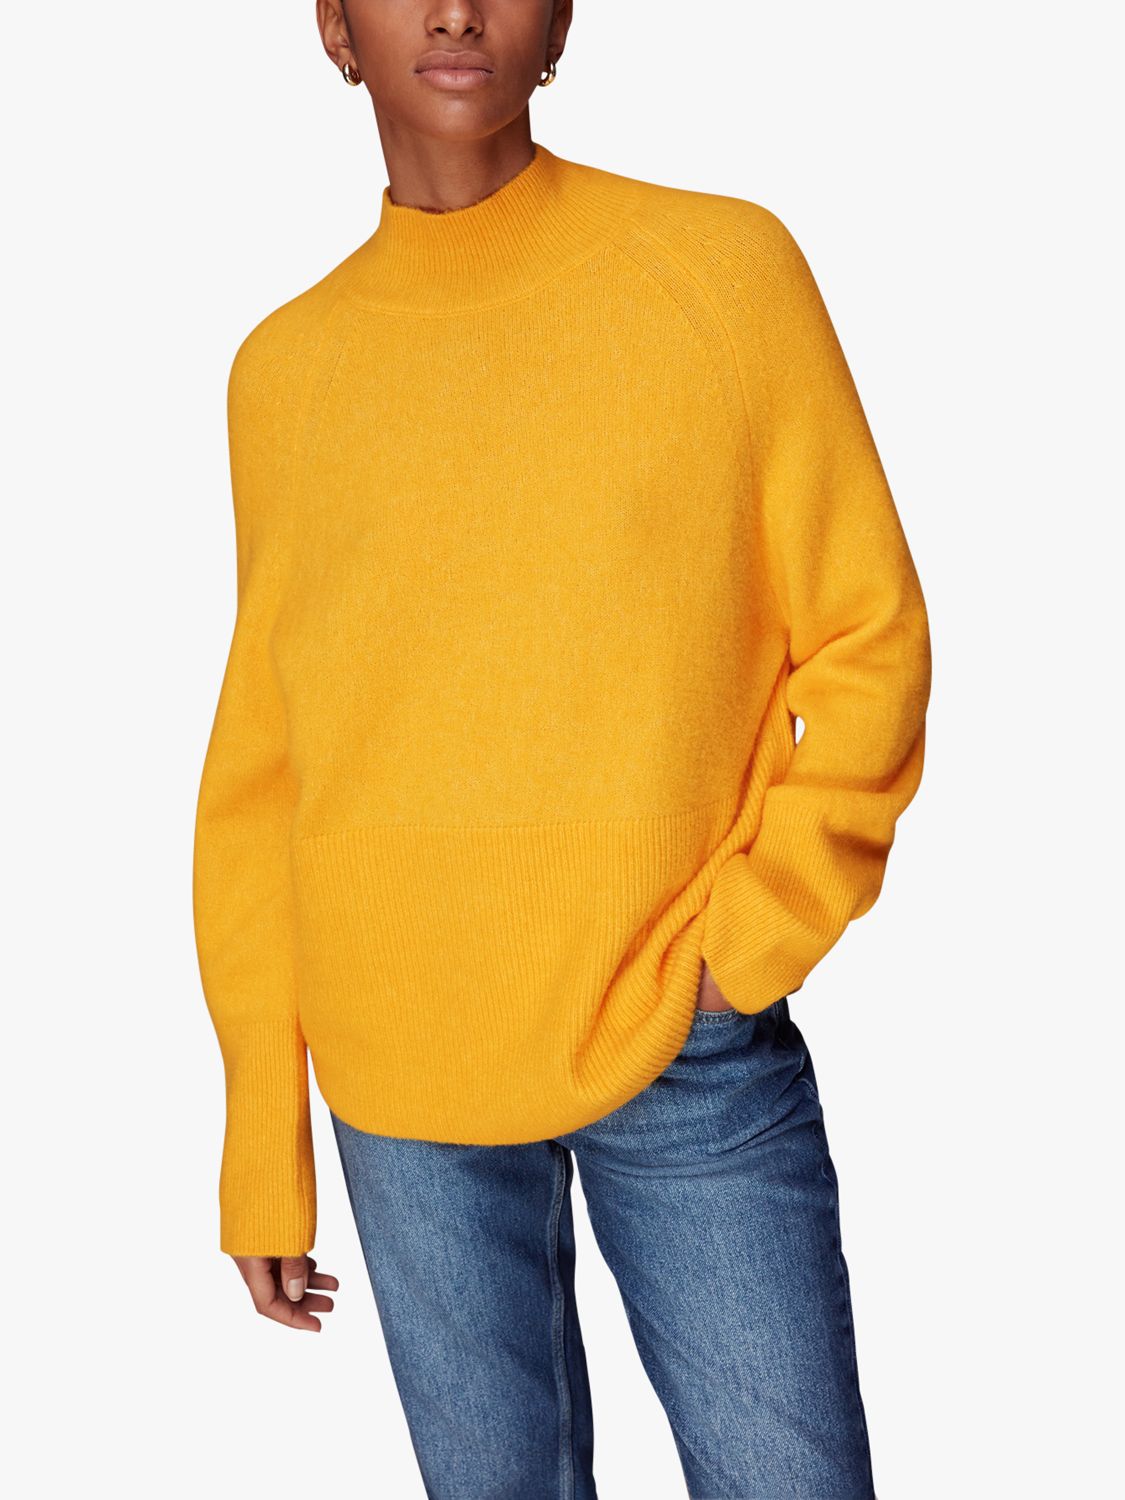 Whistles Oversize Funnel Neck Wool Blend Jumper, Yellow, L